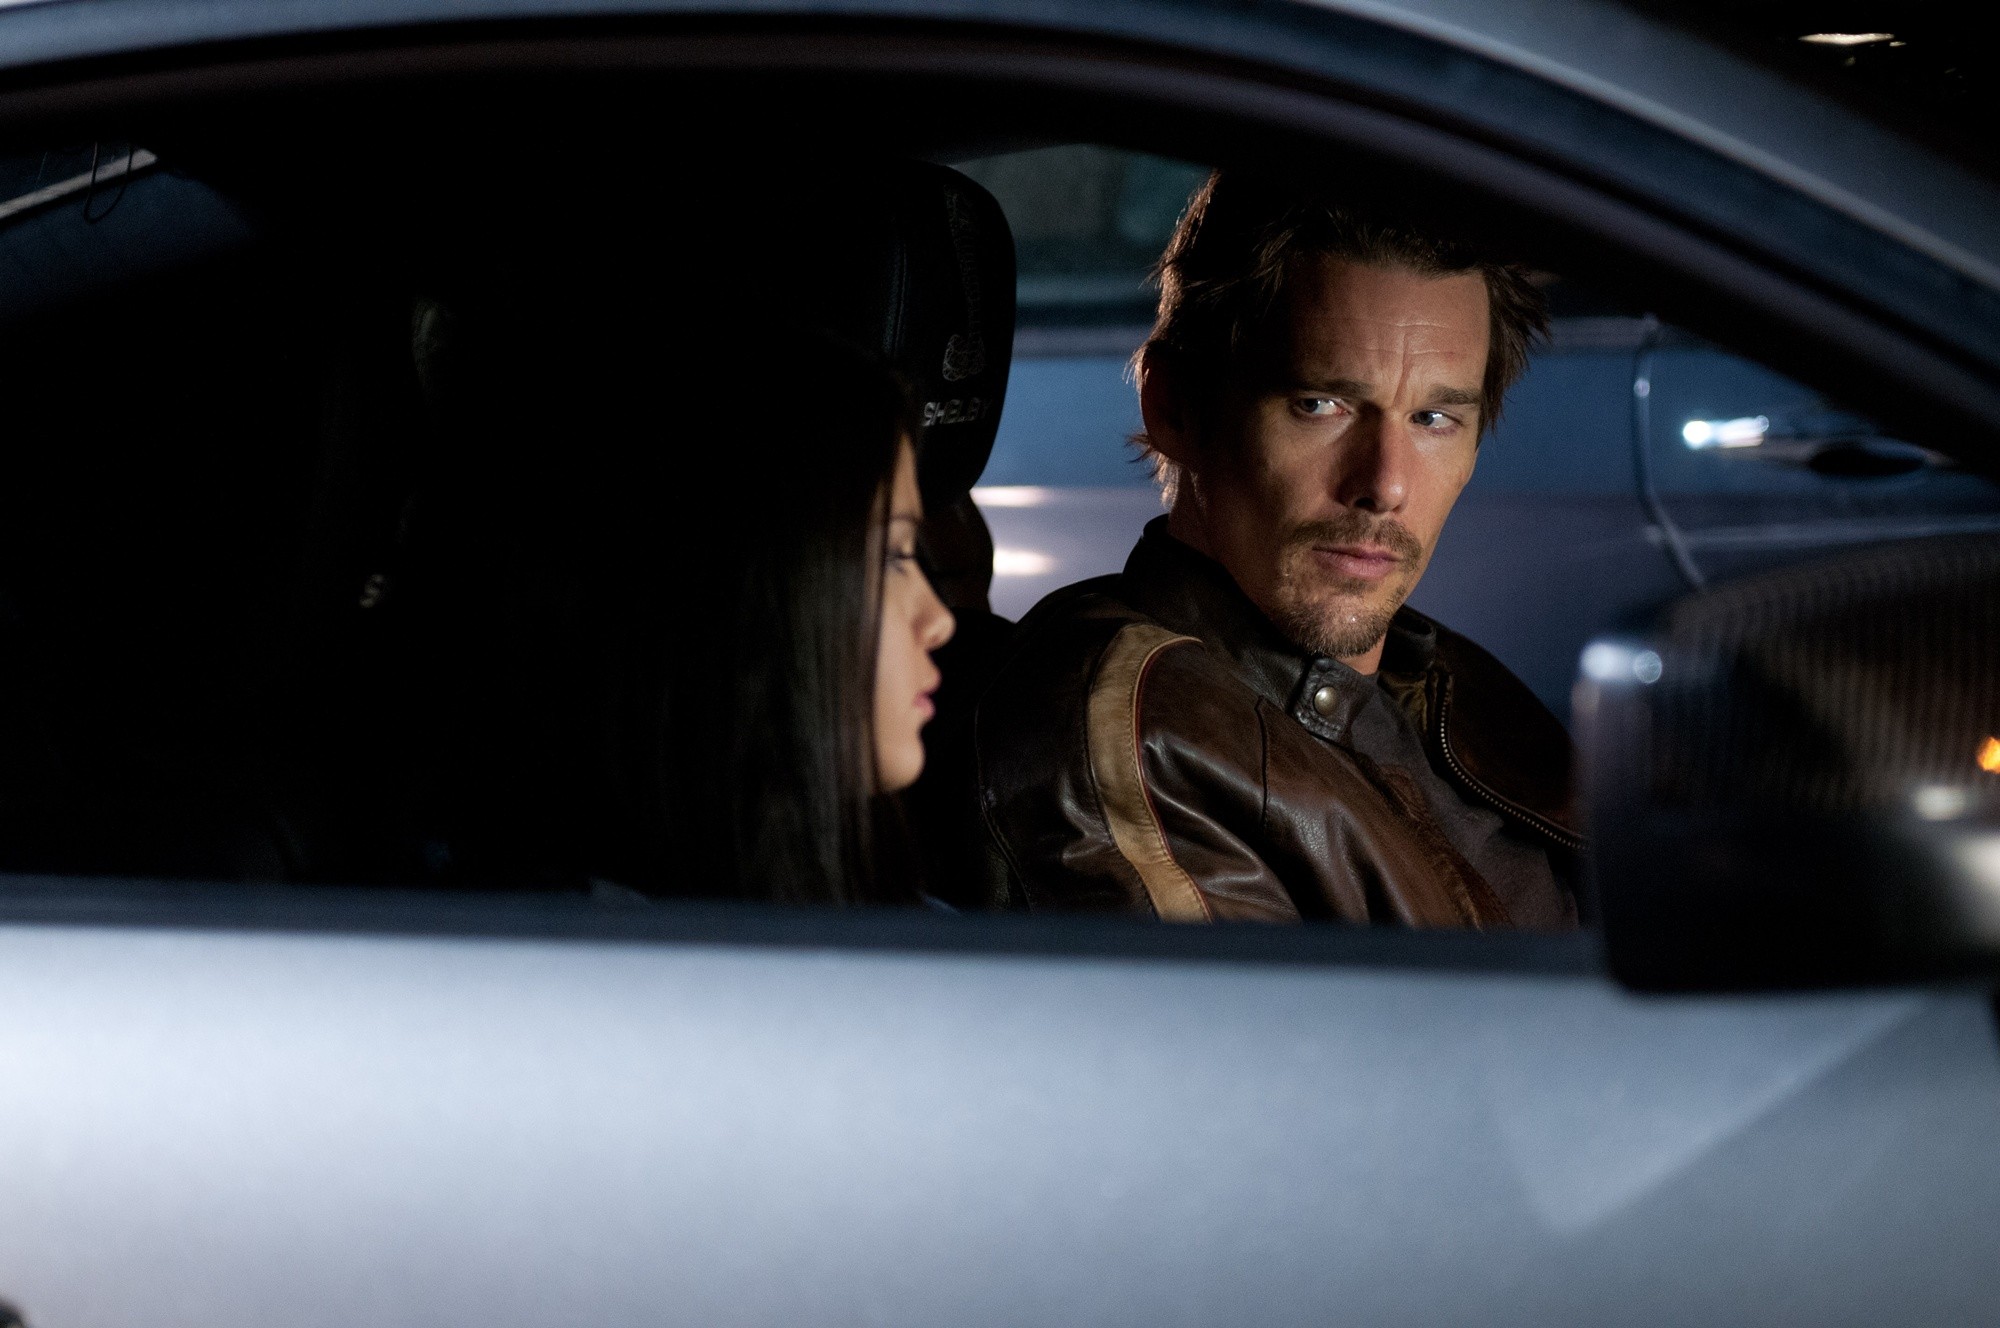 Selena Gomez stars as The Kid and Ethan Hawke stars as Brent in Warner Bros. Pictures' Getaway (2013)